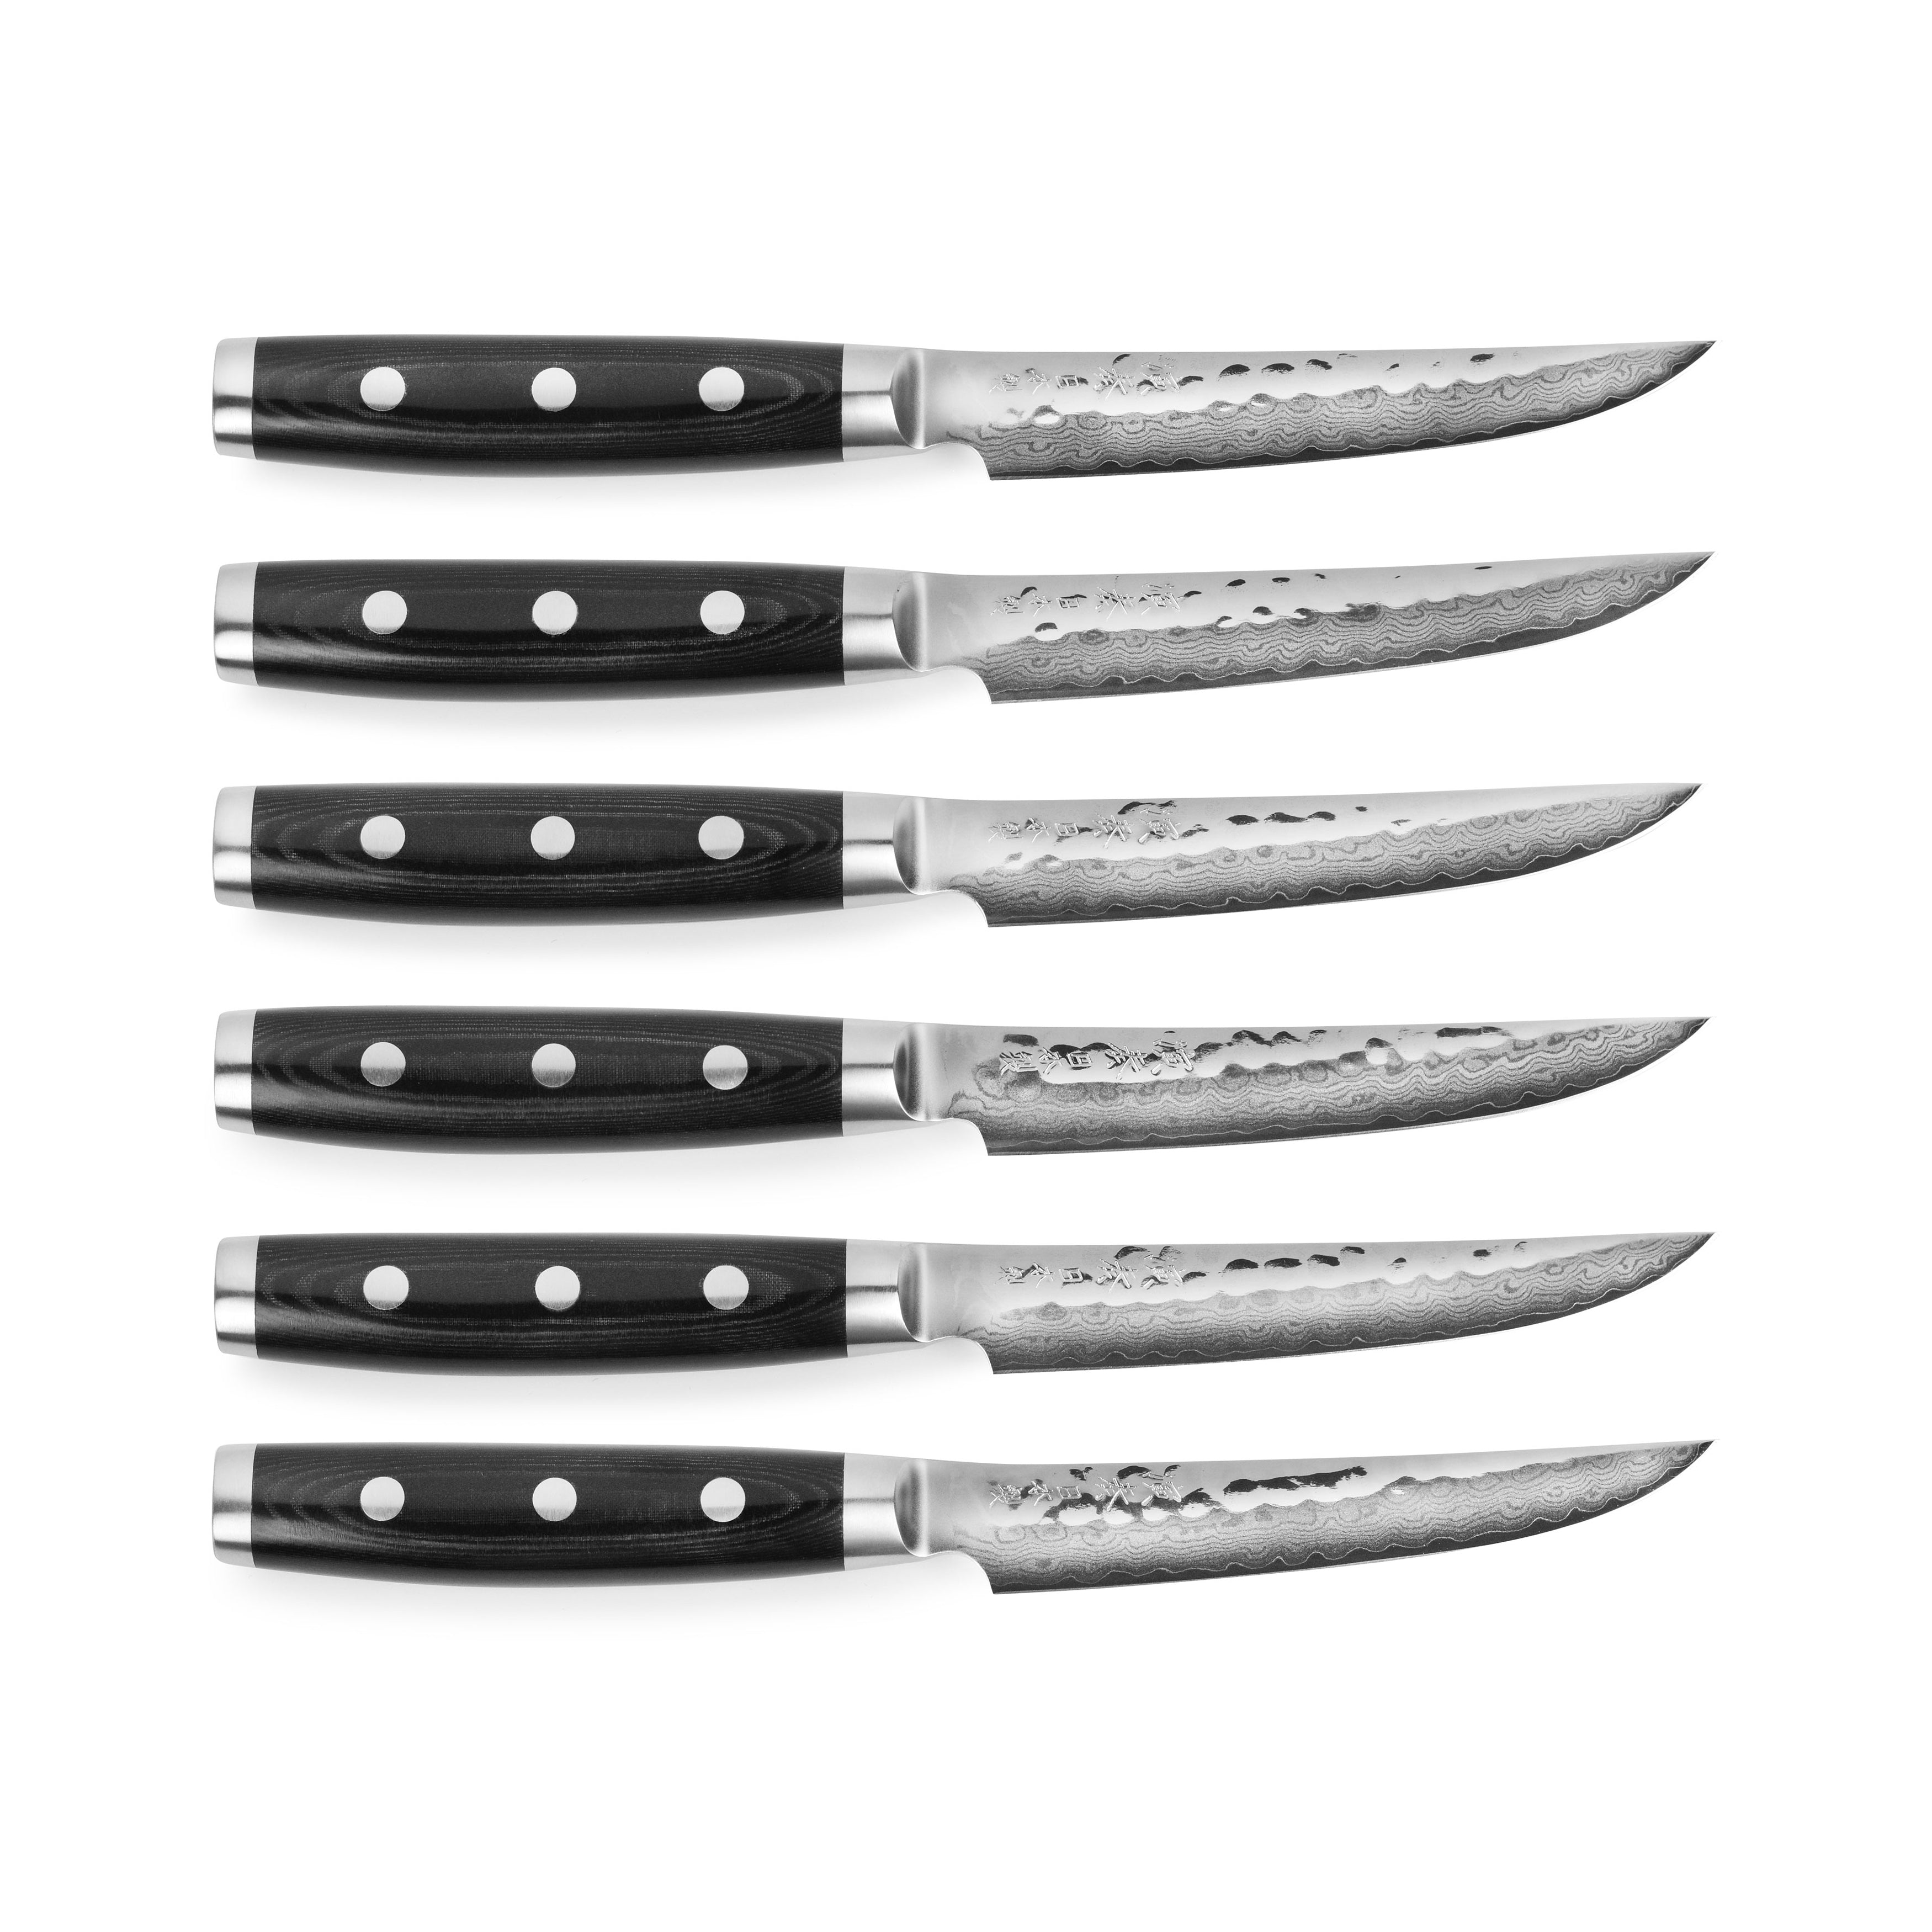 5-Inch Serrated One Piece Construction Steak Knives with Hammered